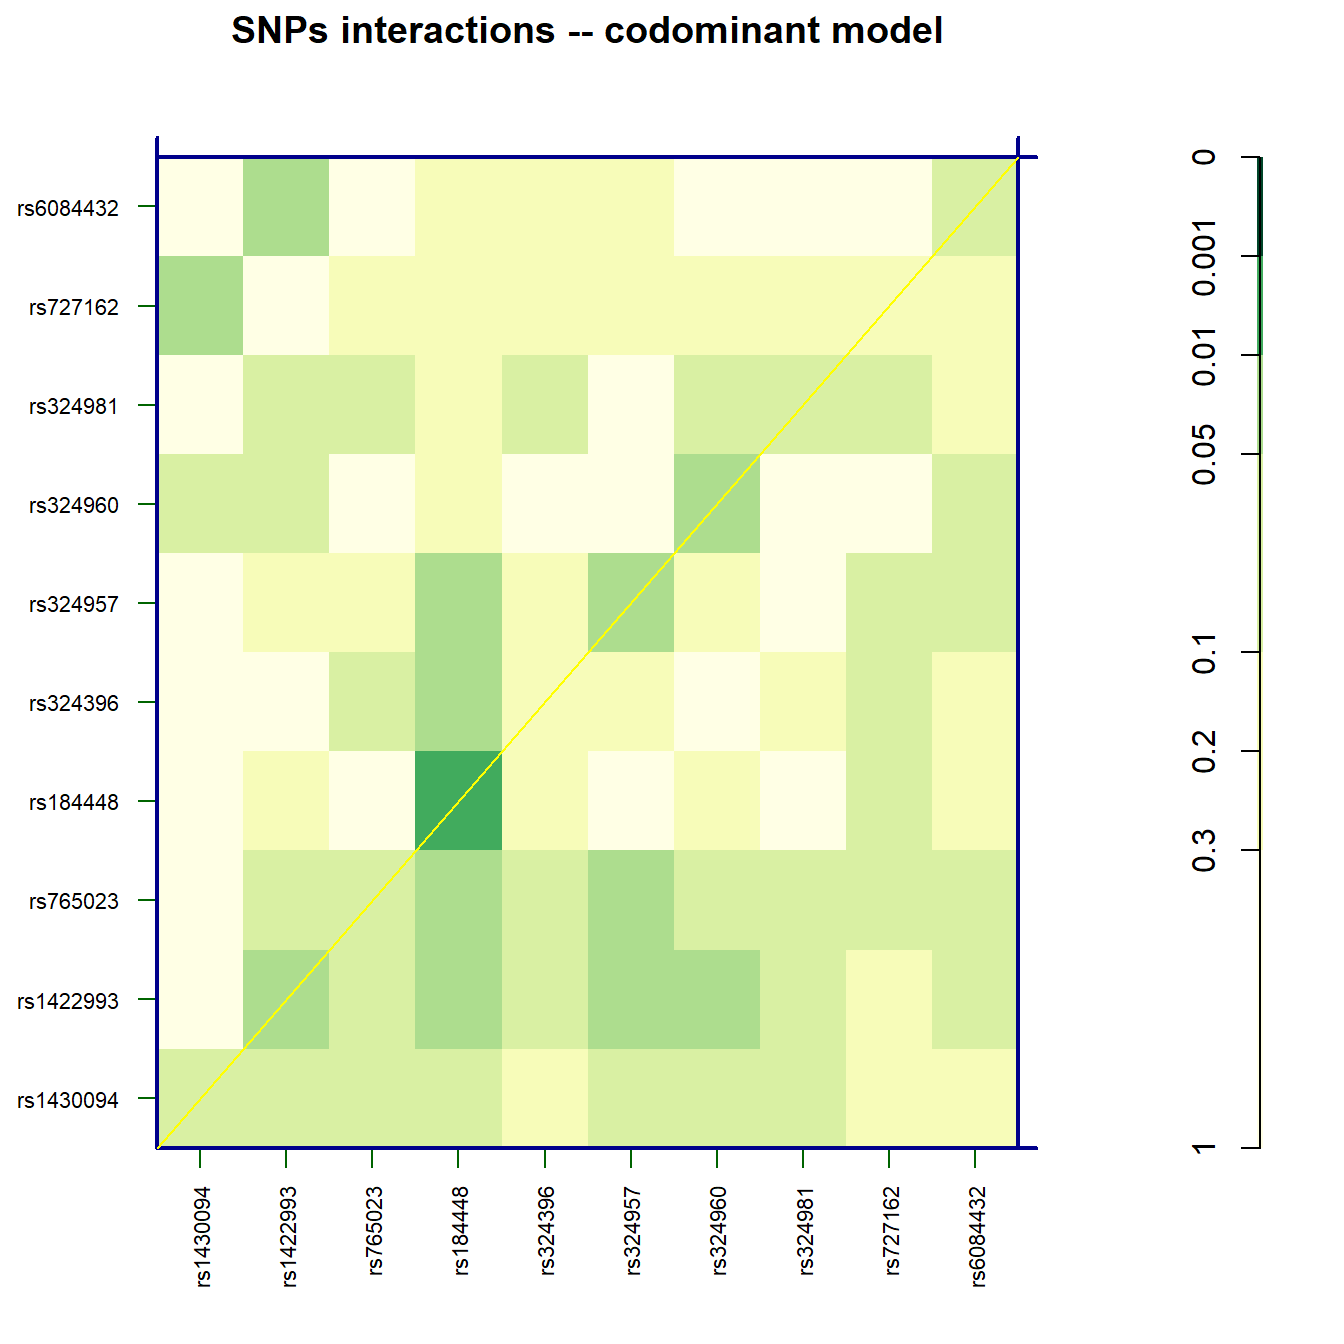 Interaction plot. Interaction plot of SNPs significant al 10\% significant level (see help of 'interactionPval'  function to see what is represented in the plot). 